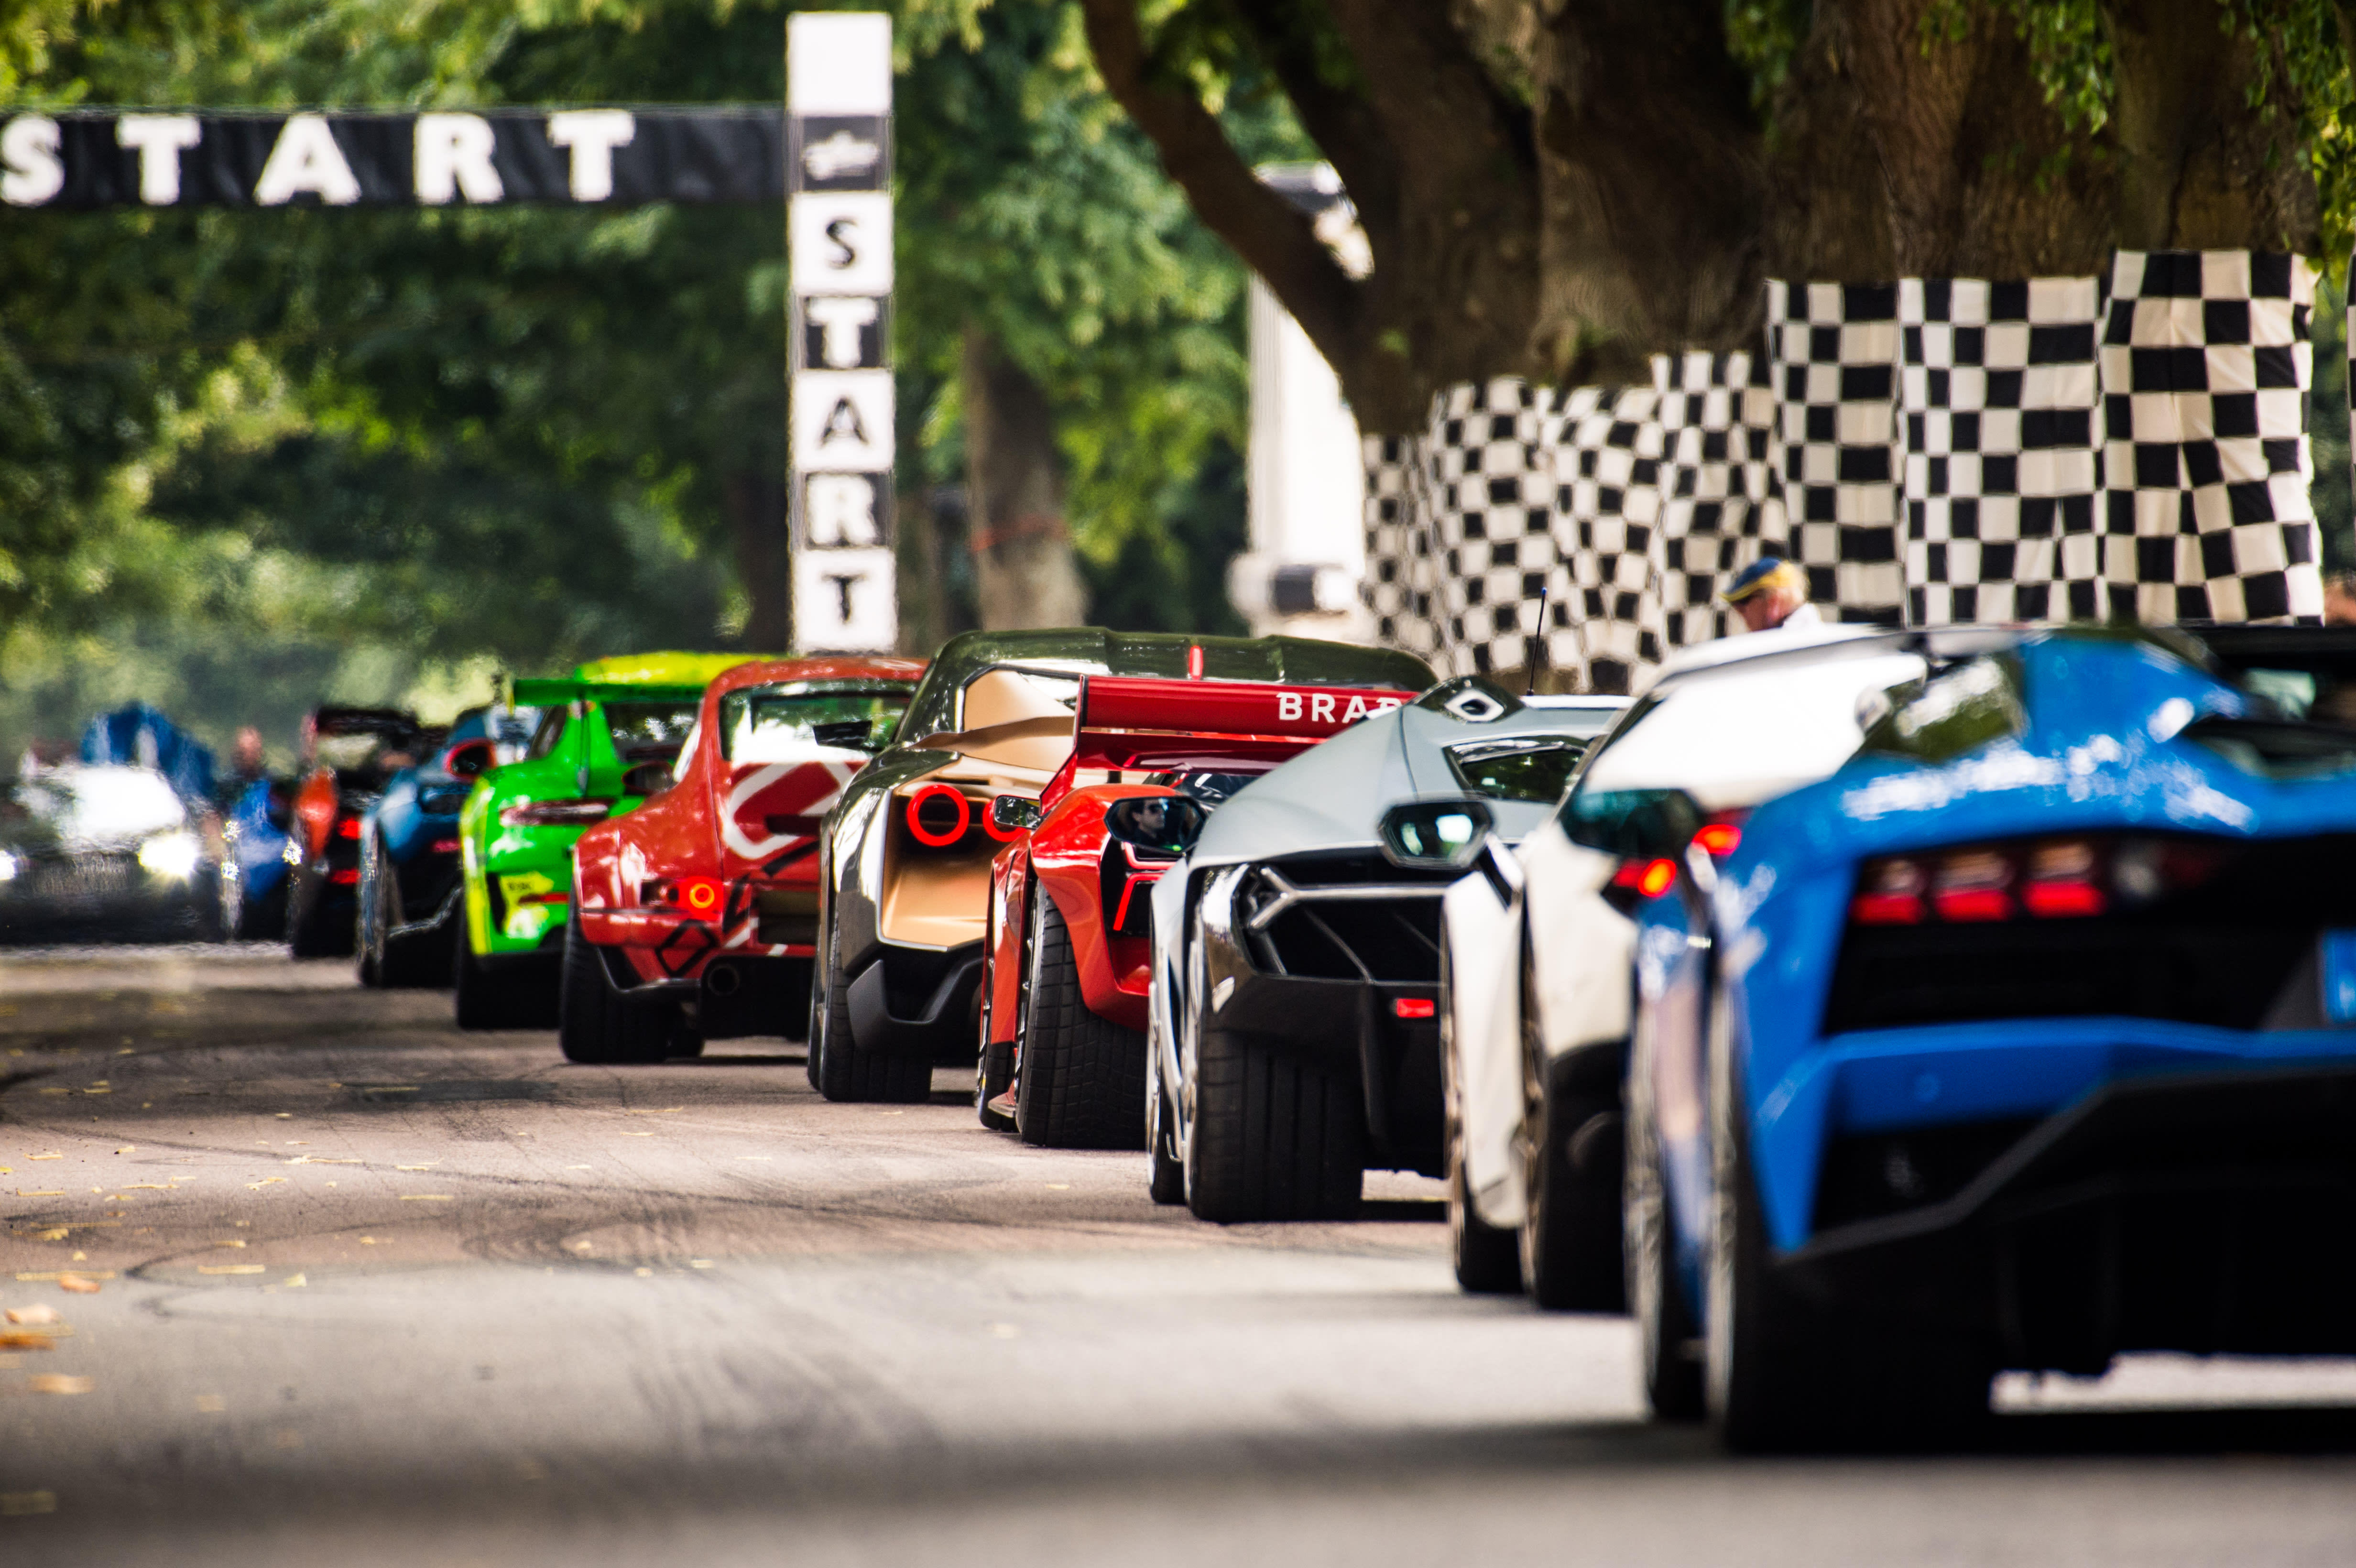 Cars ready to race at Goodwood Festival of Speed 